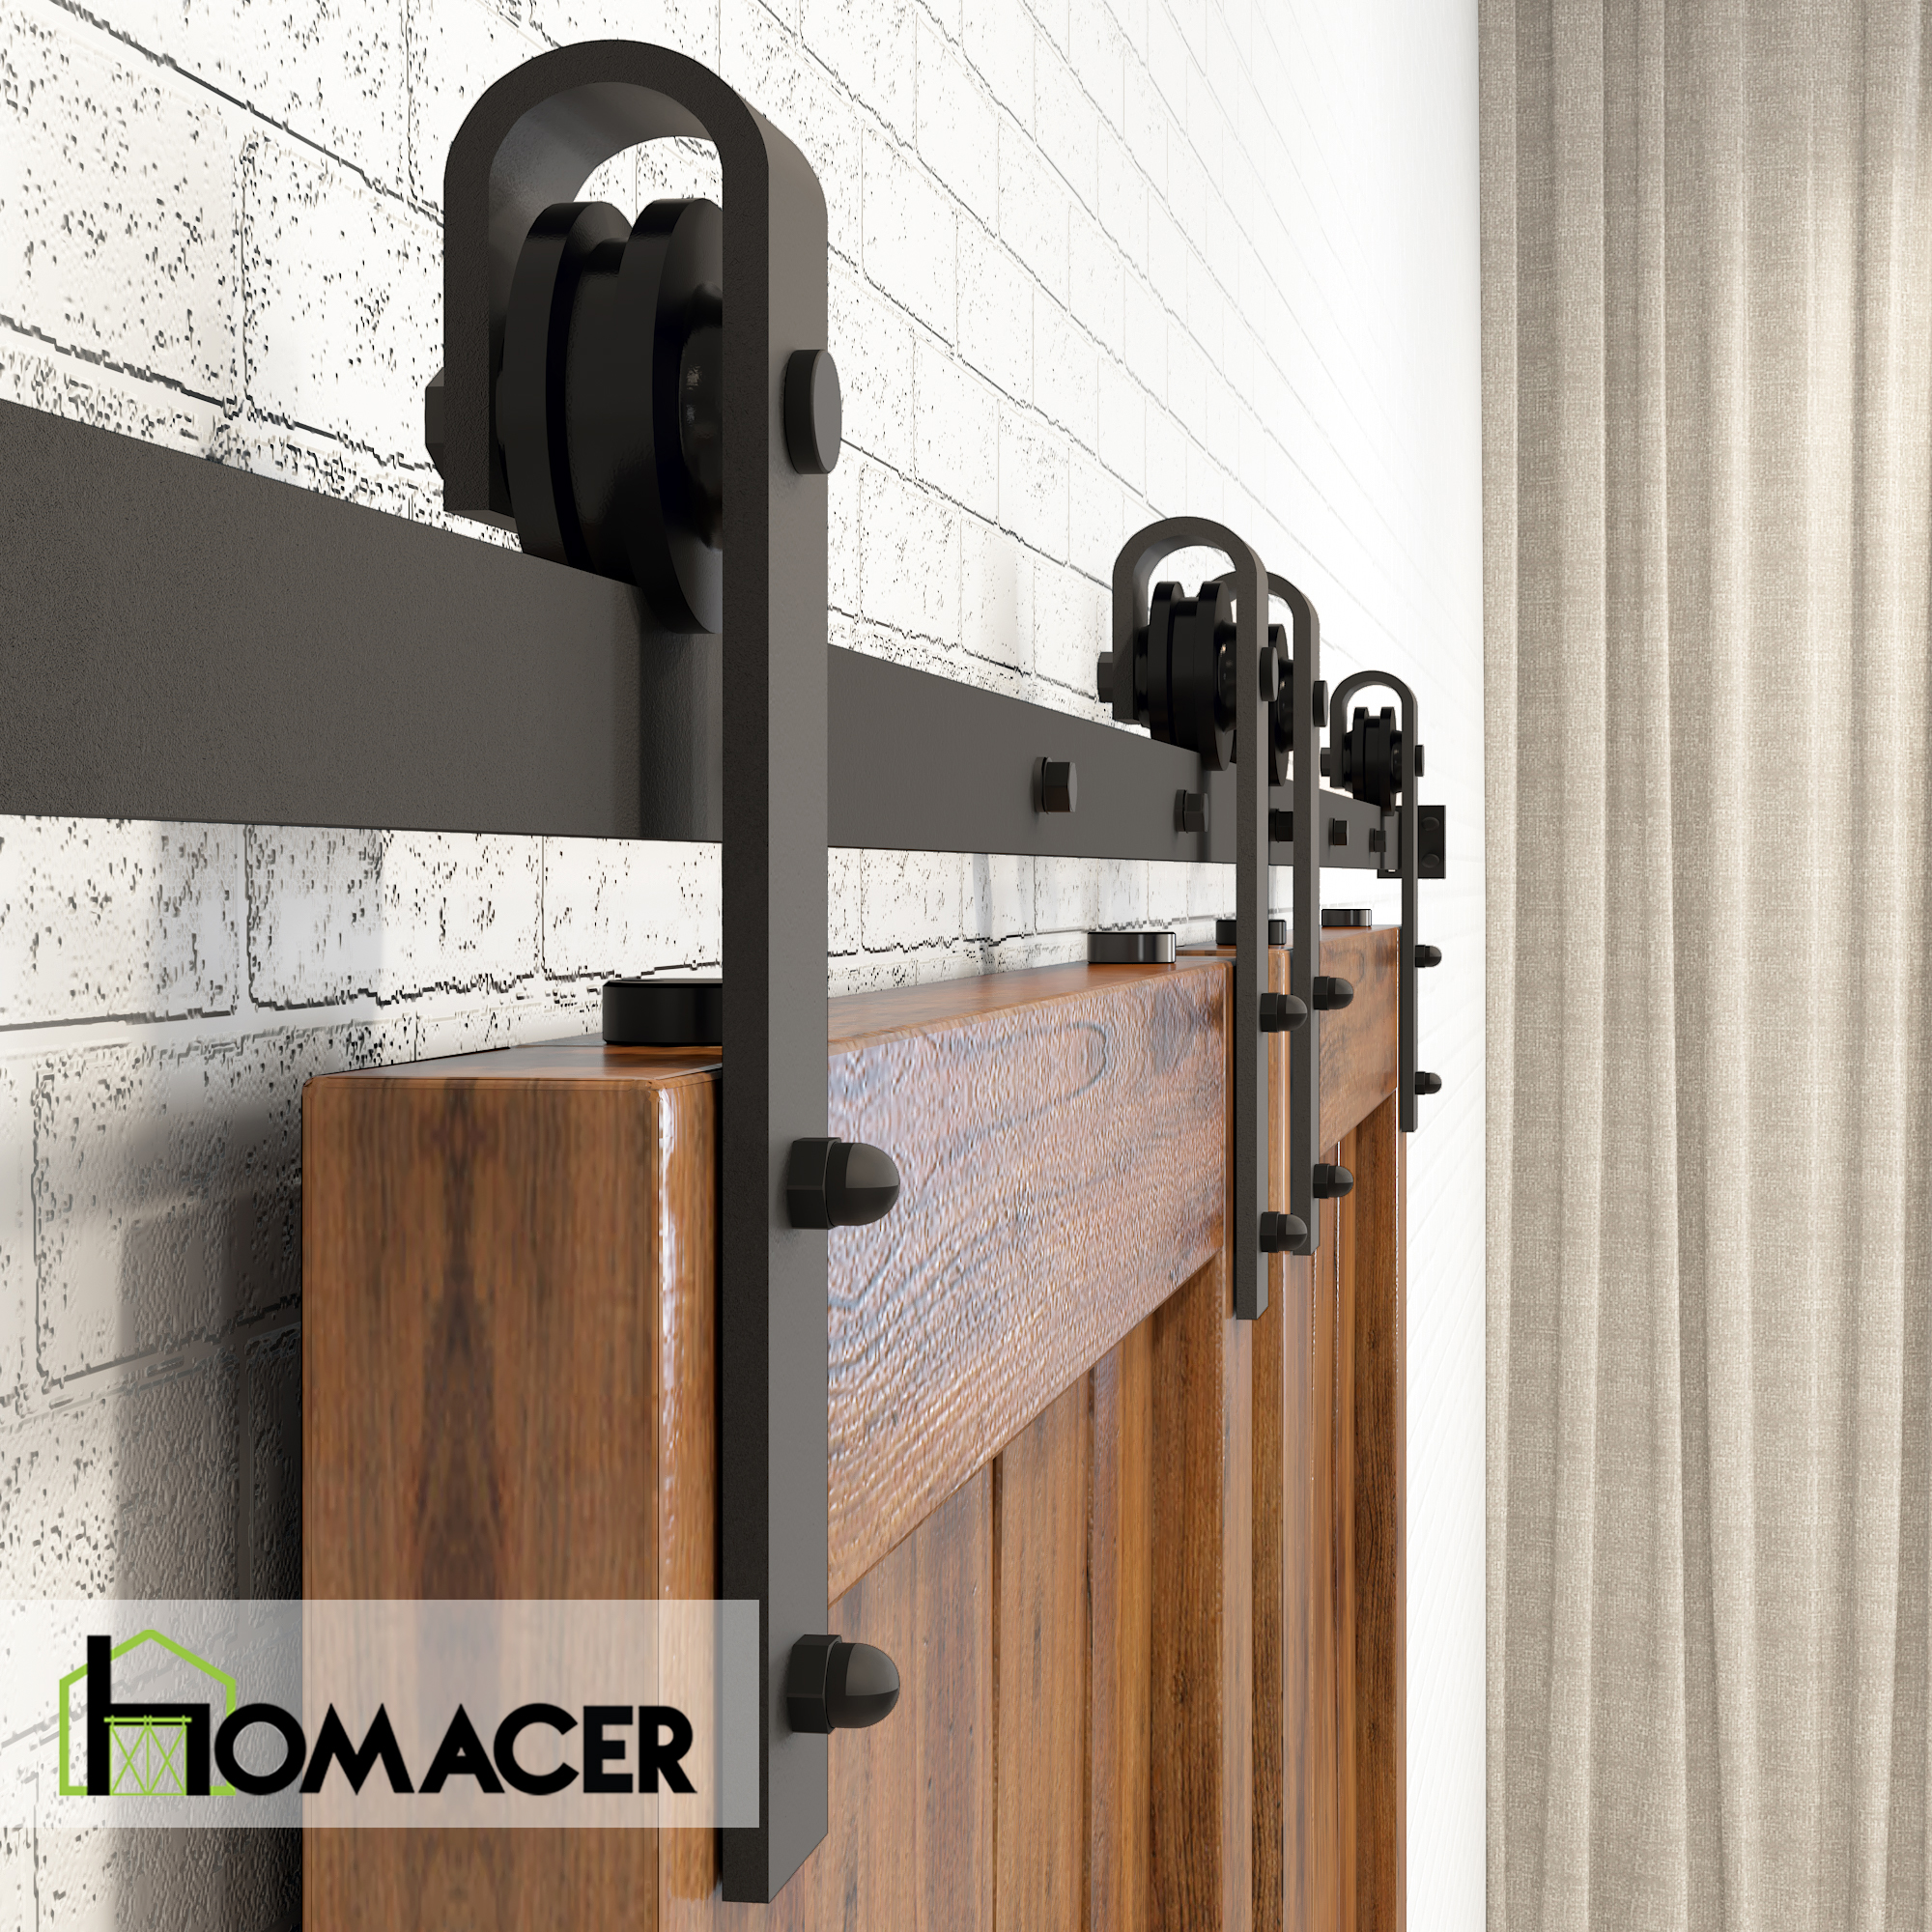 Homacer Black Rustic Sliding Barn Door Hardware Kit, for Two/Double Doors, 8ft Long Flat Track, Classic Design Roller, Heavy Duty, for Interior & Exterior Use - image 5 of 7